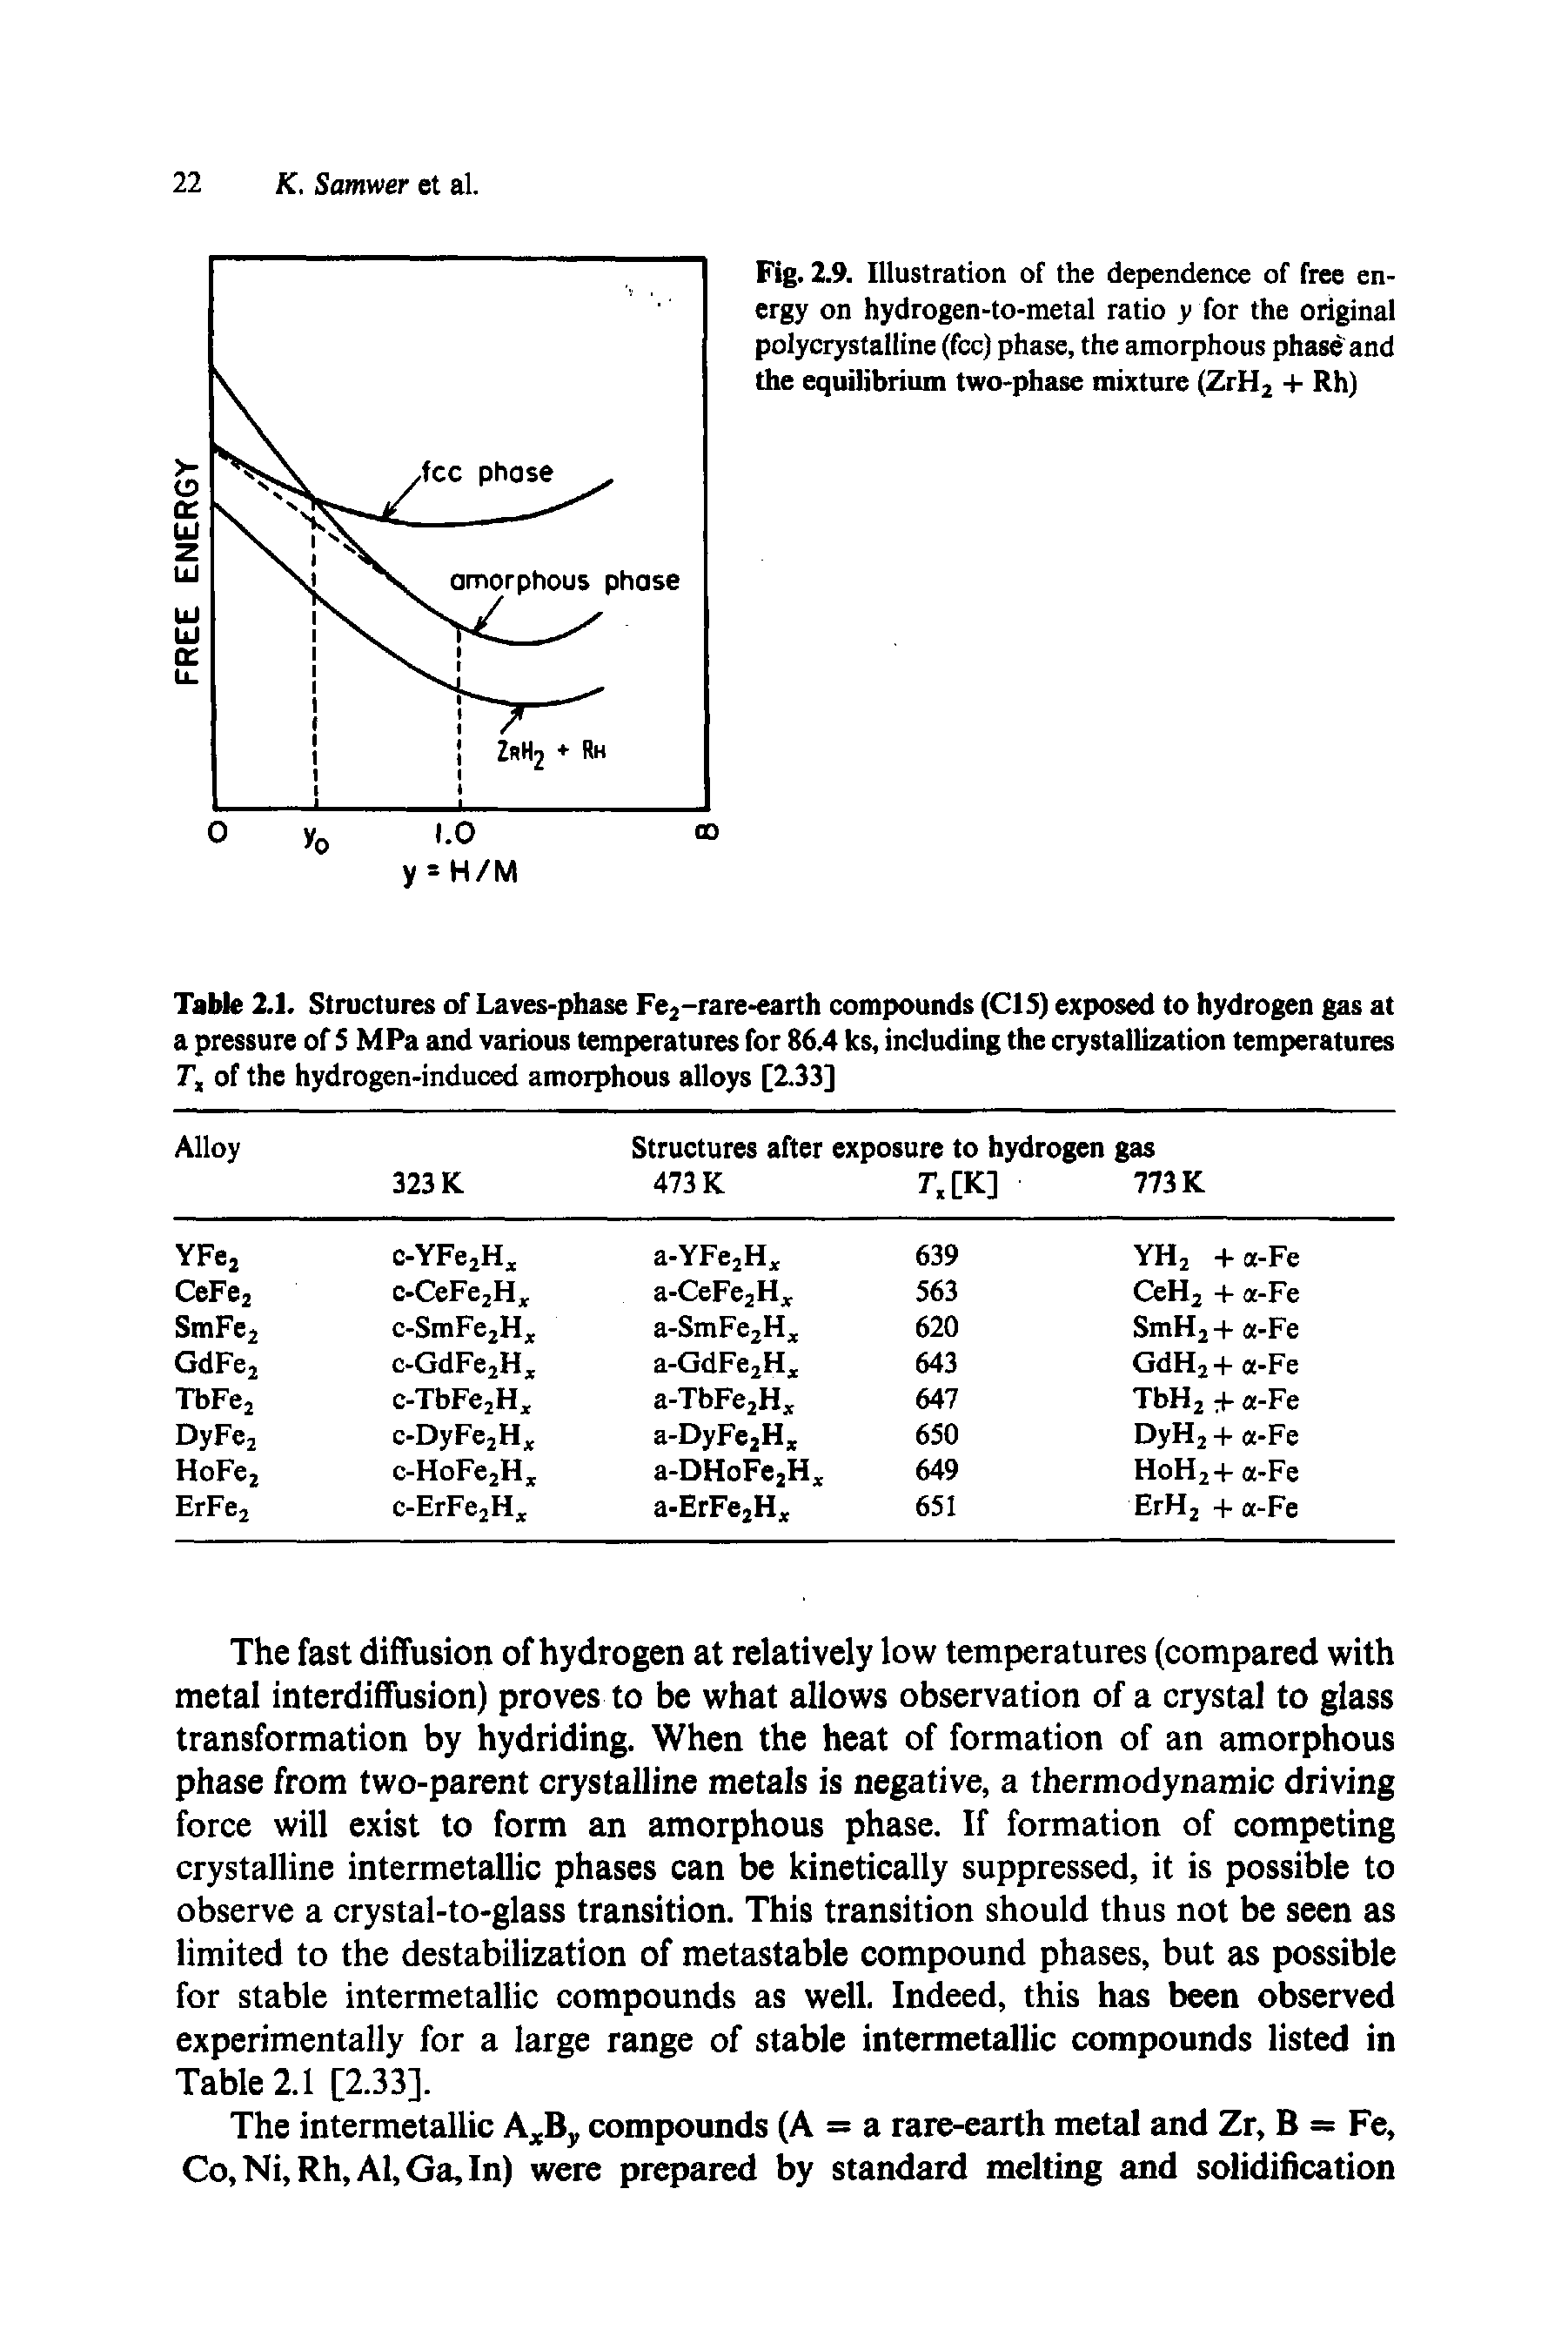 Table 2.1. Structures of Laves-phase Fe2-rare-earth compounds (CIS) exposed to hydrogen gas at a pressure of 5 MPa and various temperatures for 86.4 ks, including the crystallization temperatures Tx of the hydrogen-induced amorphous alloys [2.33]...